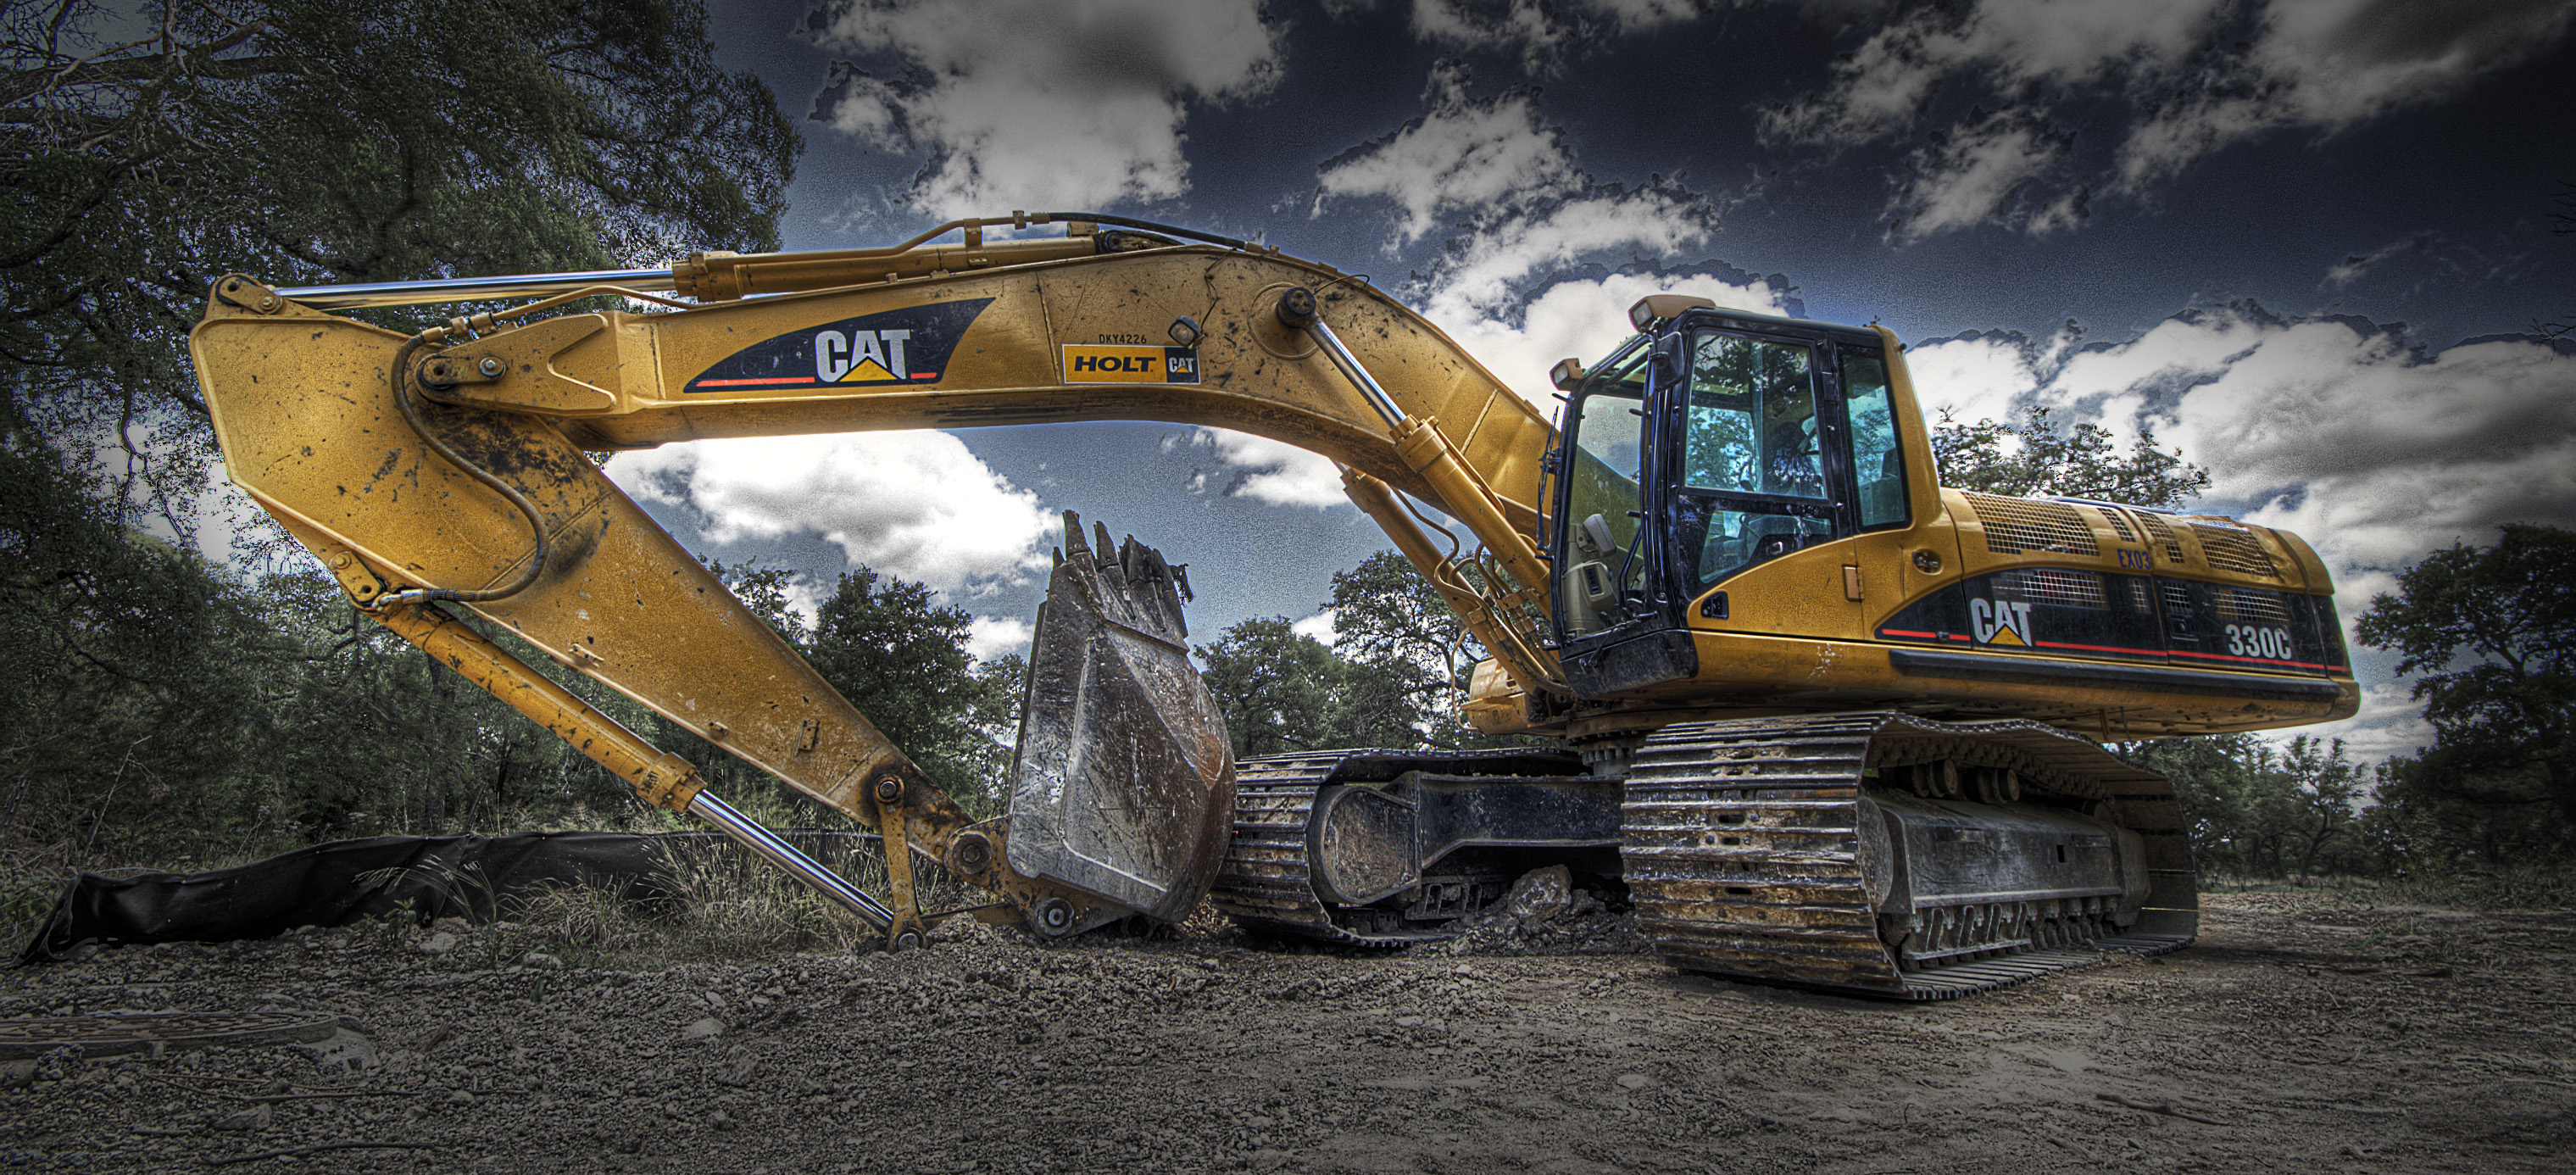 Find An Efficient Excavator For Your Business Truck Trailer